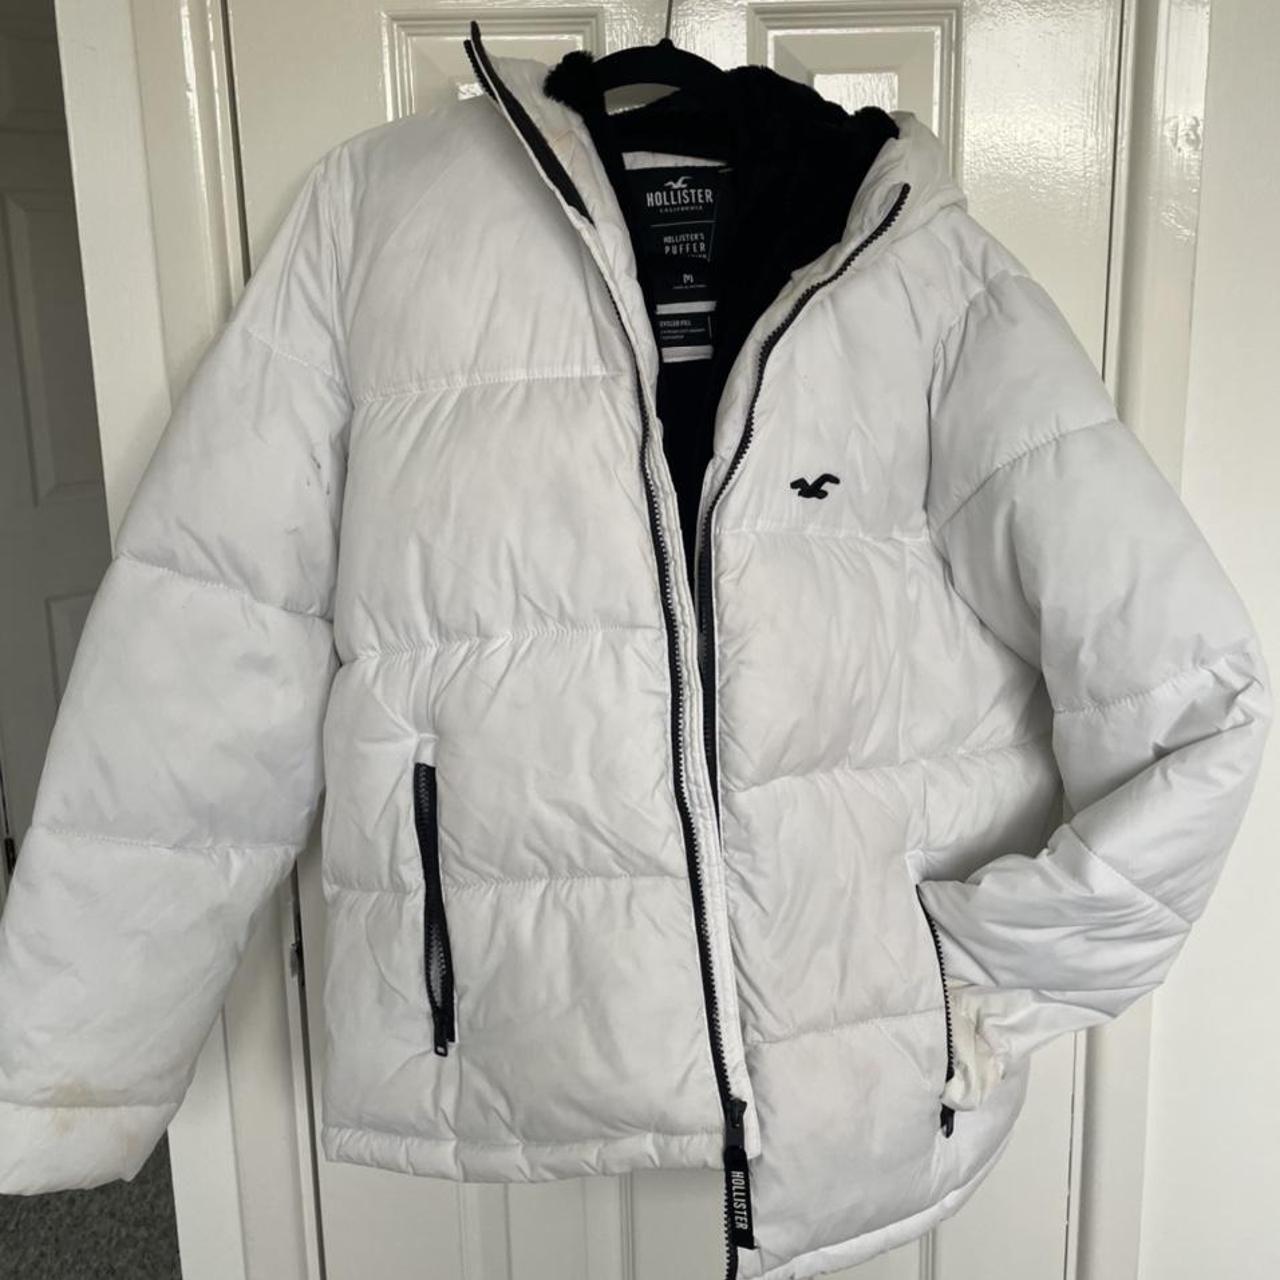 Hollister white puffer jacket with fur lining, Very